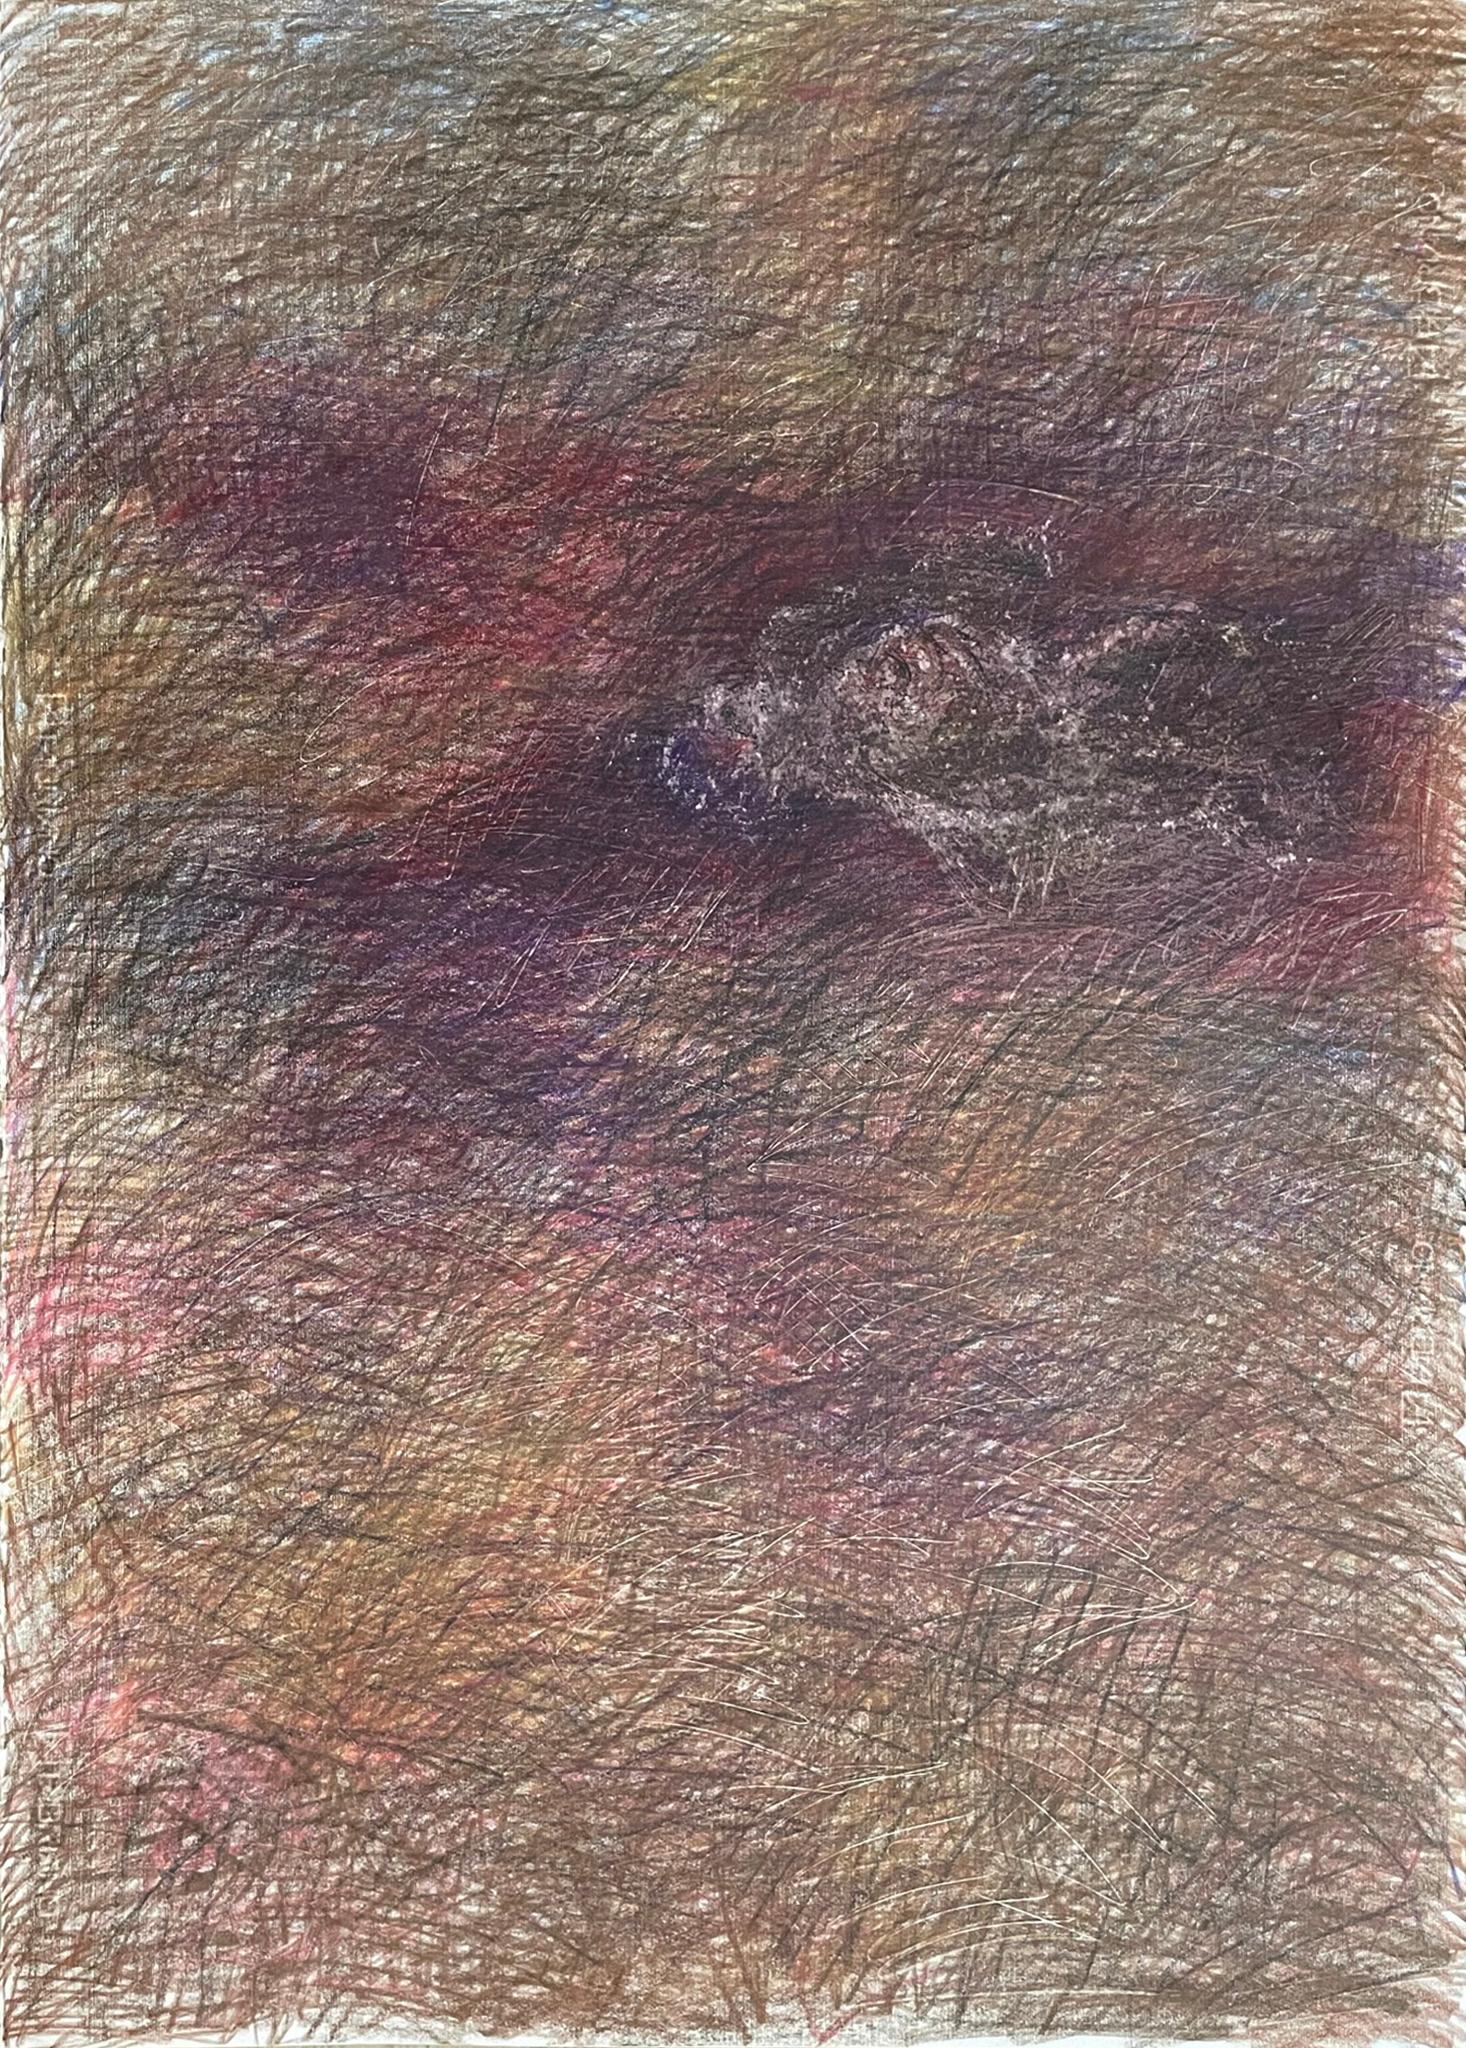 Untitled_Remains Body on the Field - Contemporary, 21st Century, Drawing